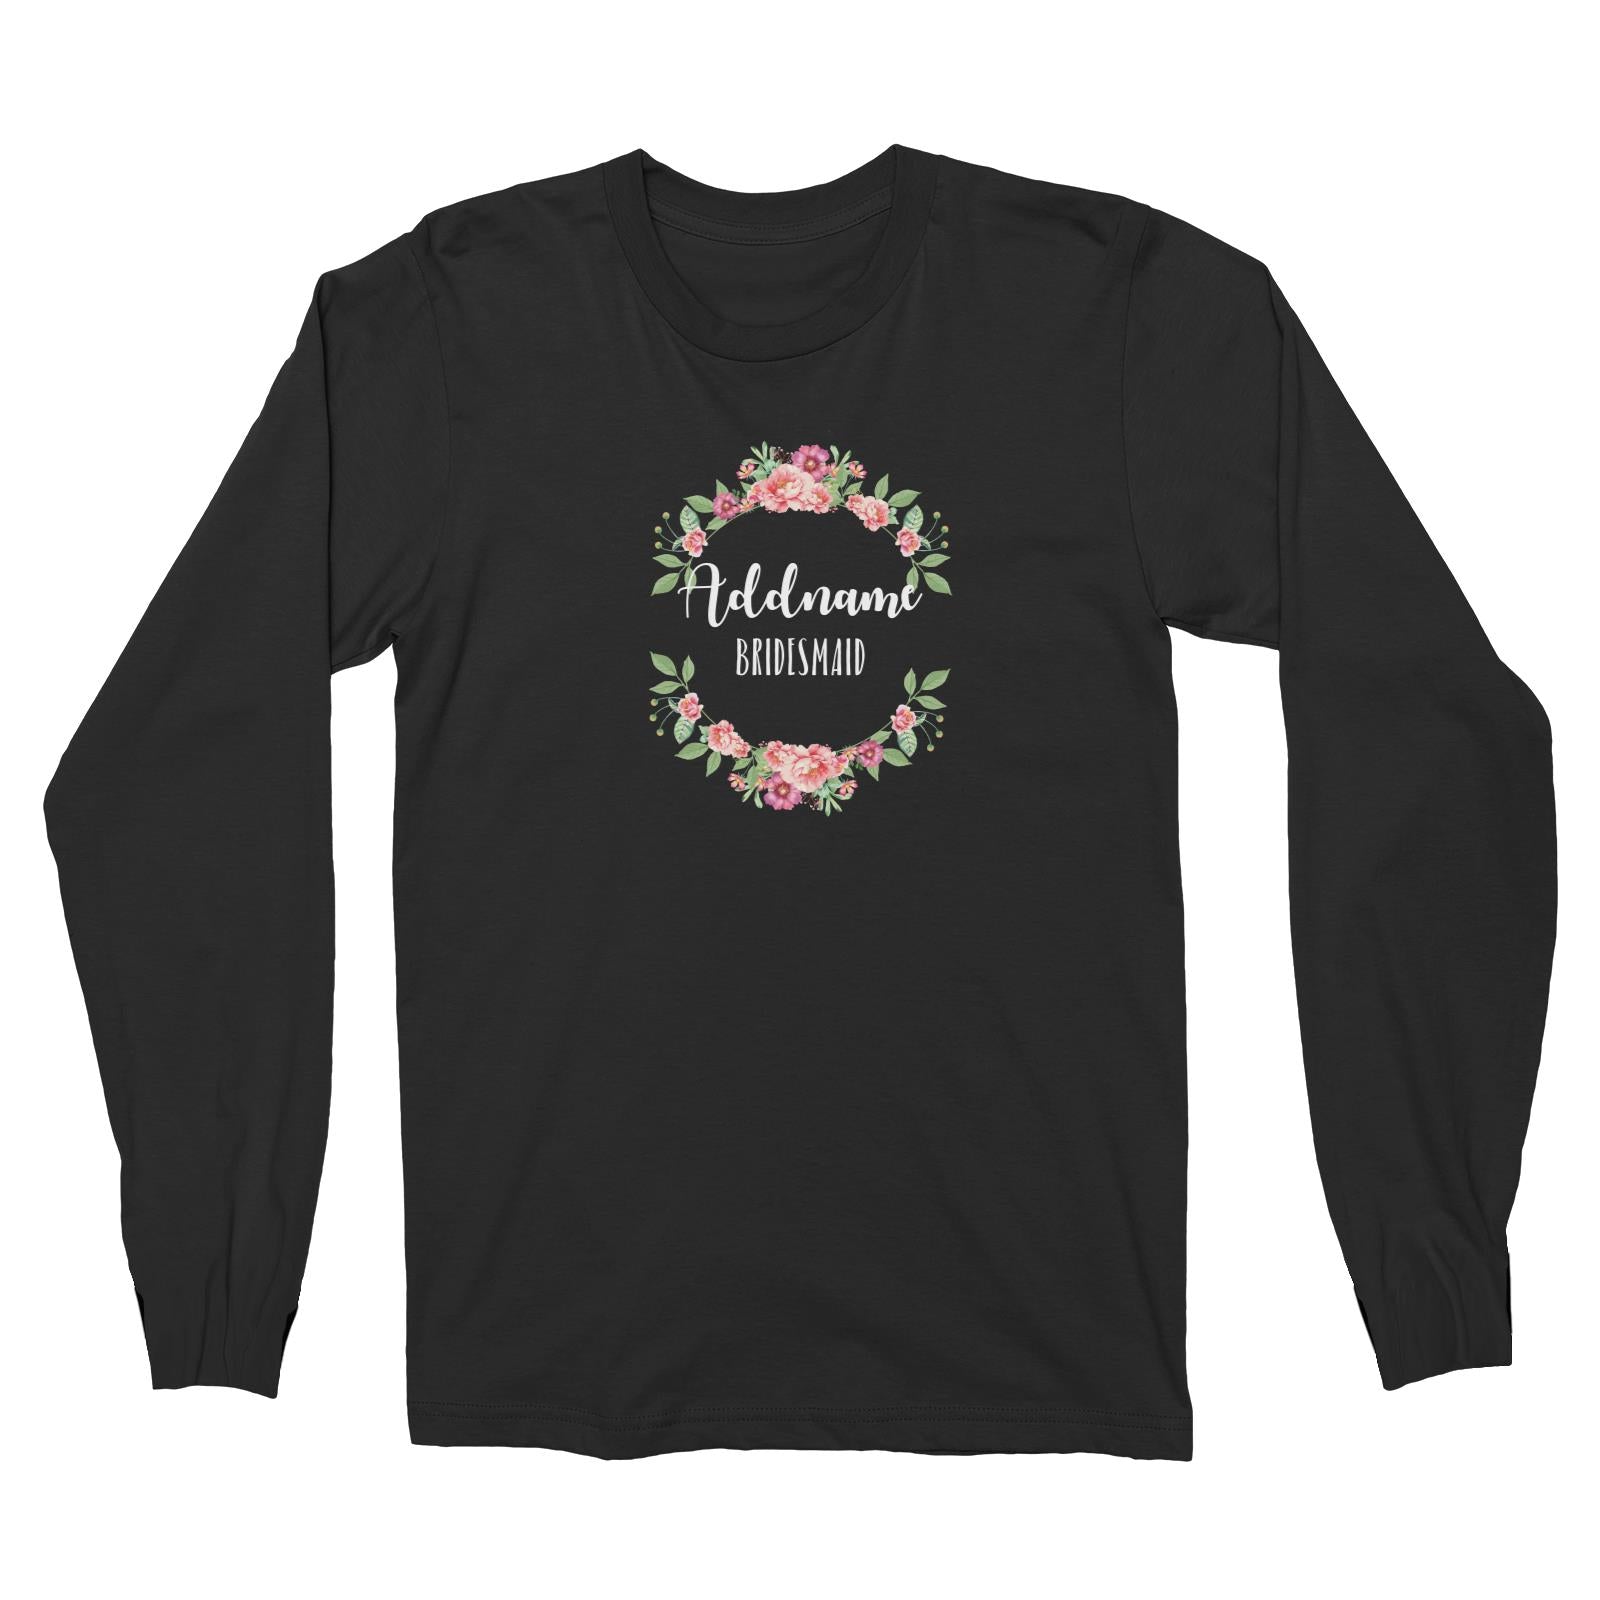 Bridesmaid Floral Sweet Coral Flower Wreath Bridesmaid Addname Long Sleeve Unisex T-Shirt